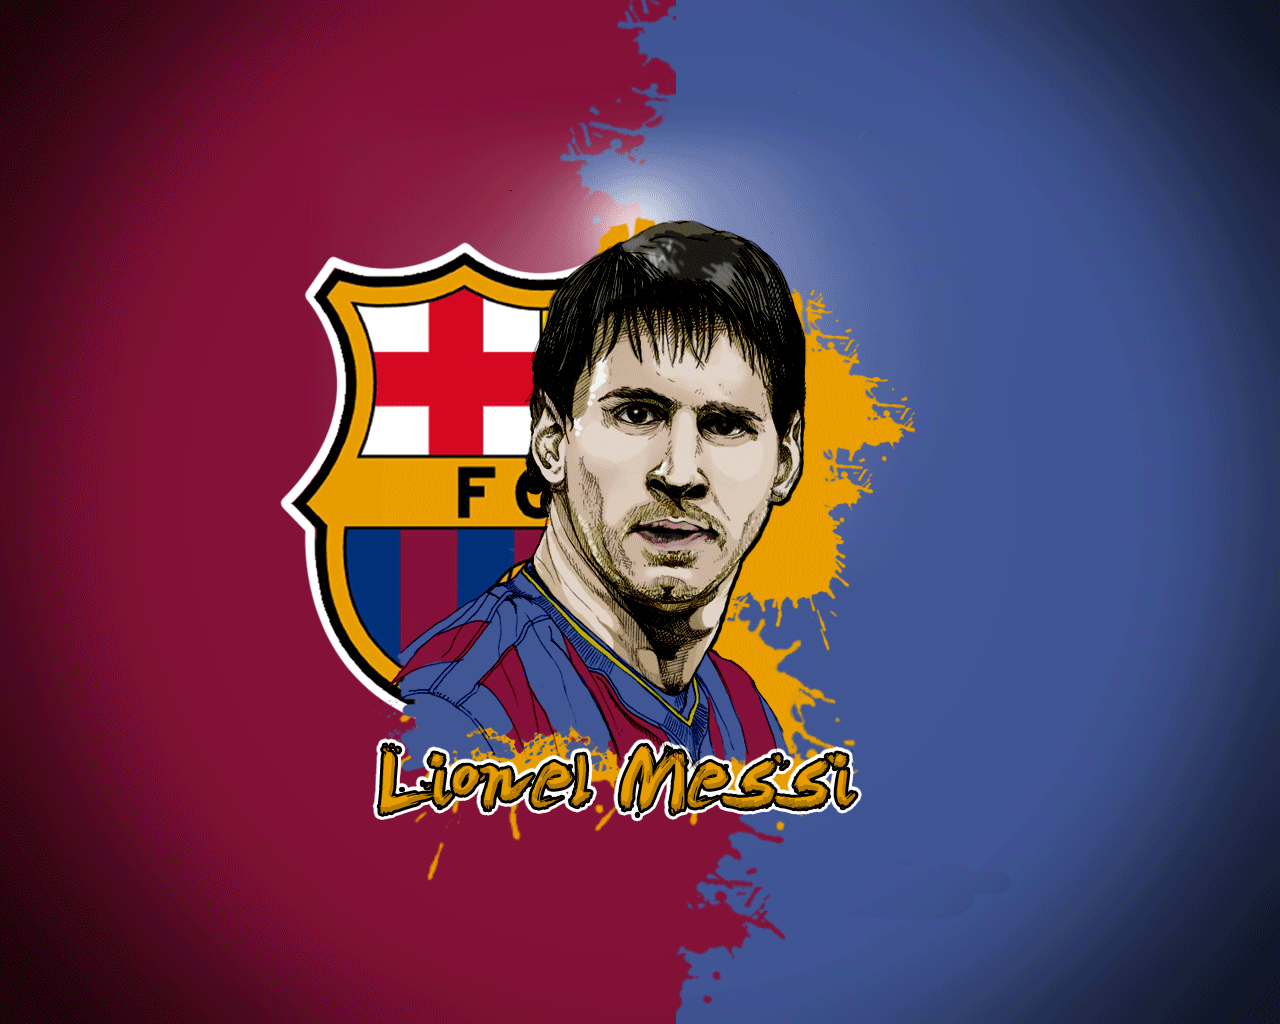 TOP HD WALLPAPERS MESSI WALLPAPERS